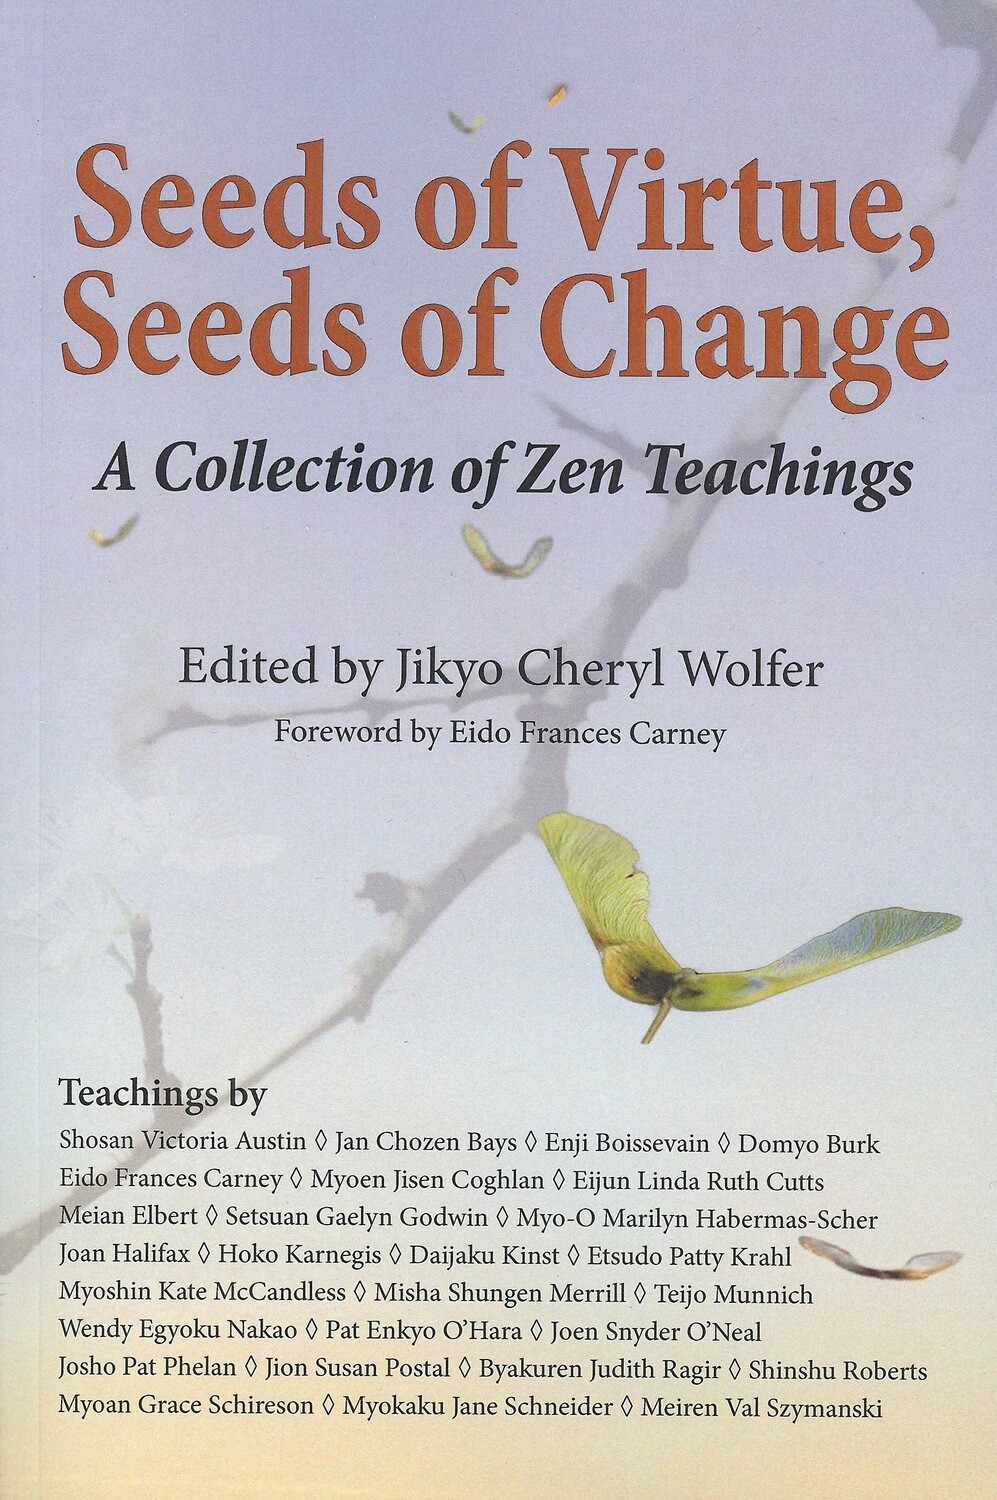 Seeds of Virtue, Seeds of Change - A Collection of Zen Teachings